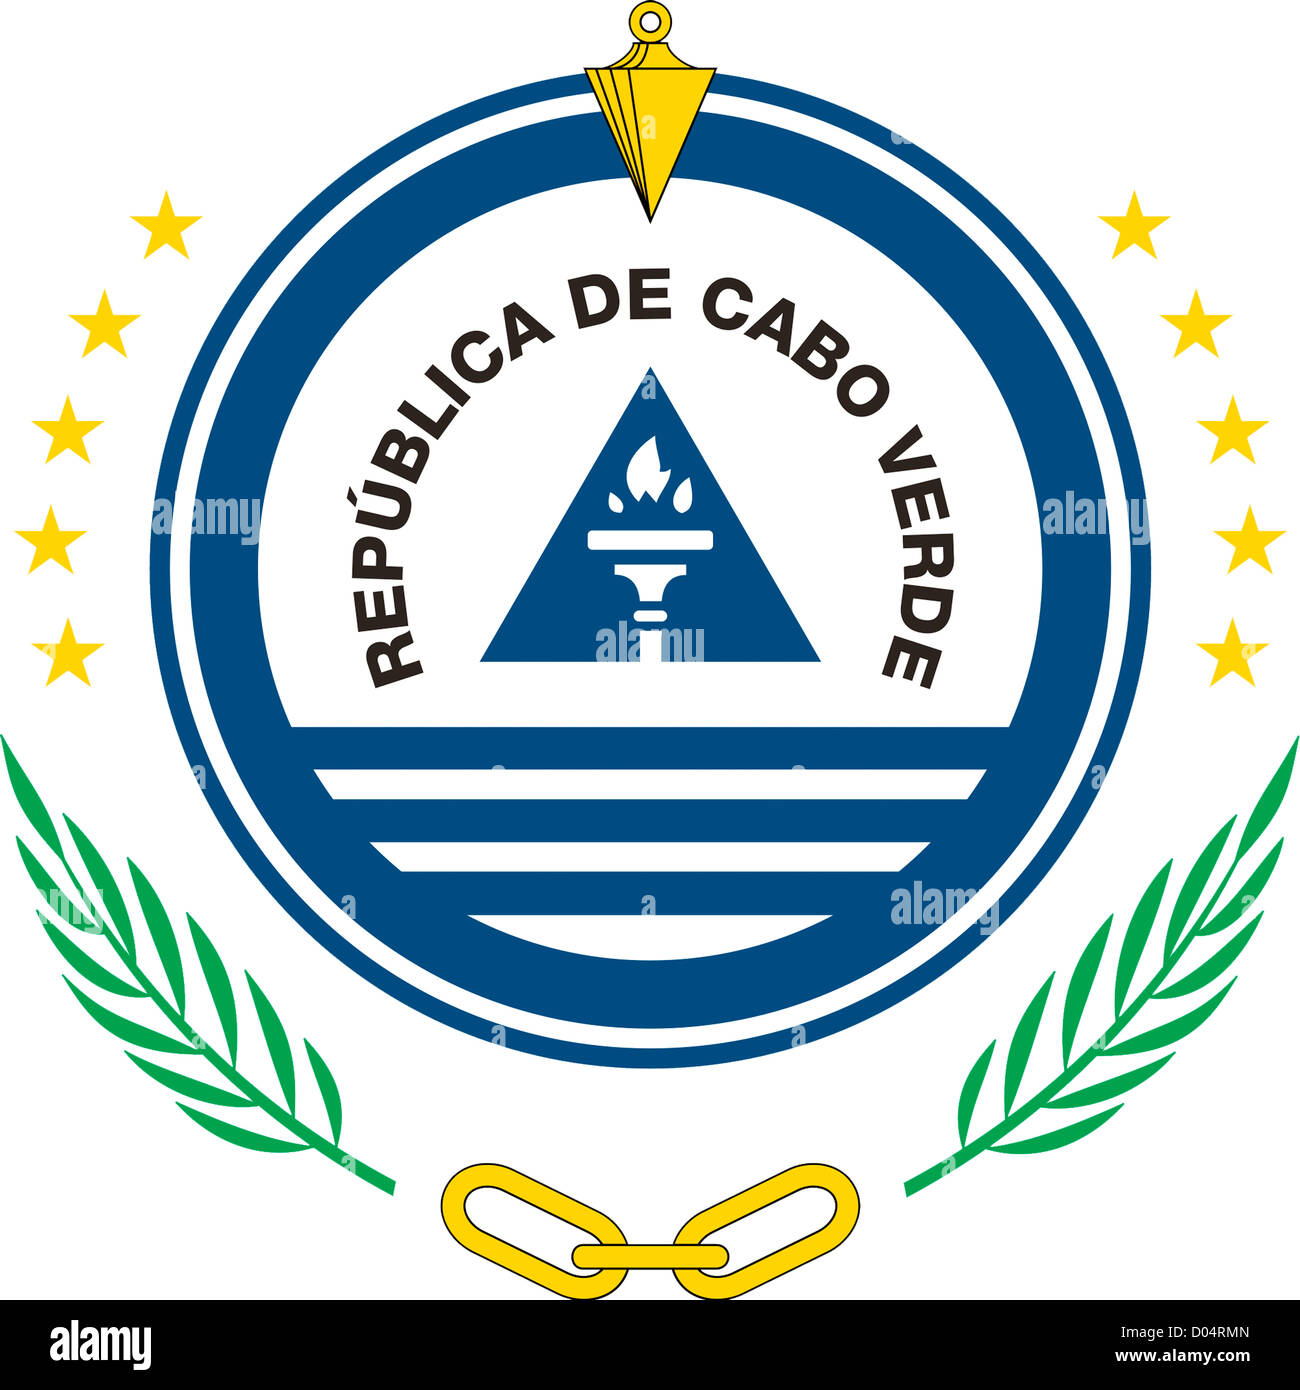 National coat of arms of the Republic of Cape Verde. Stock Photo